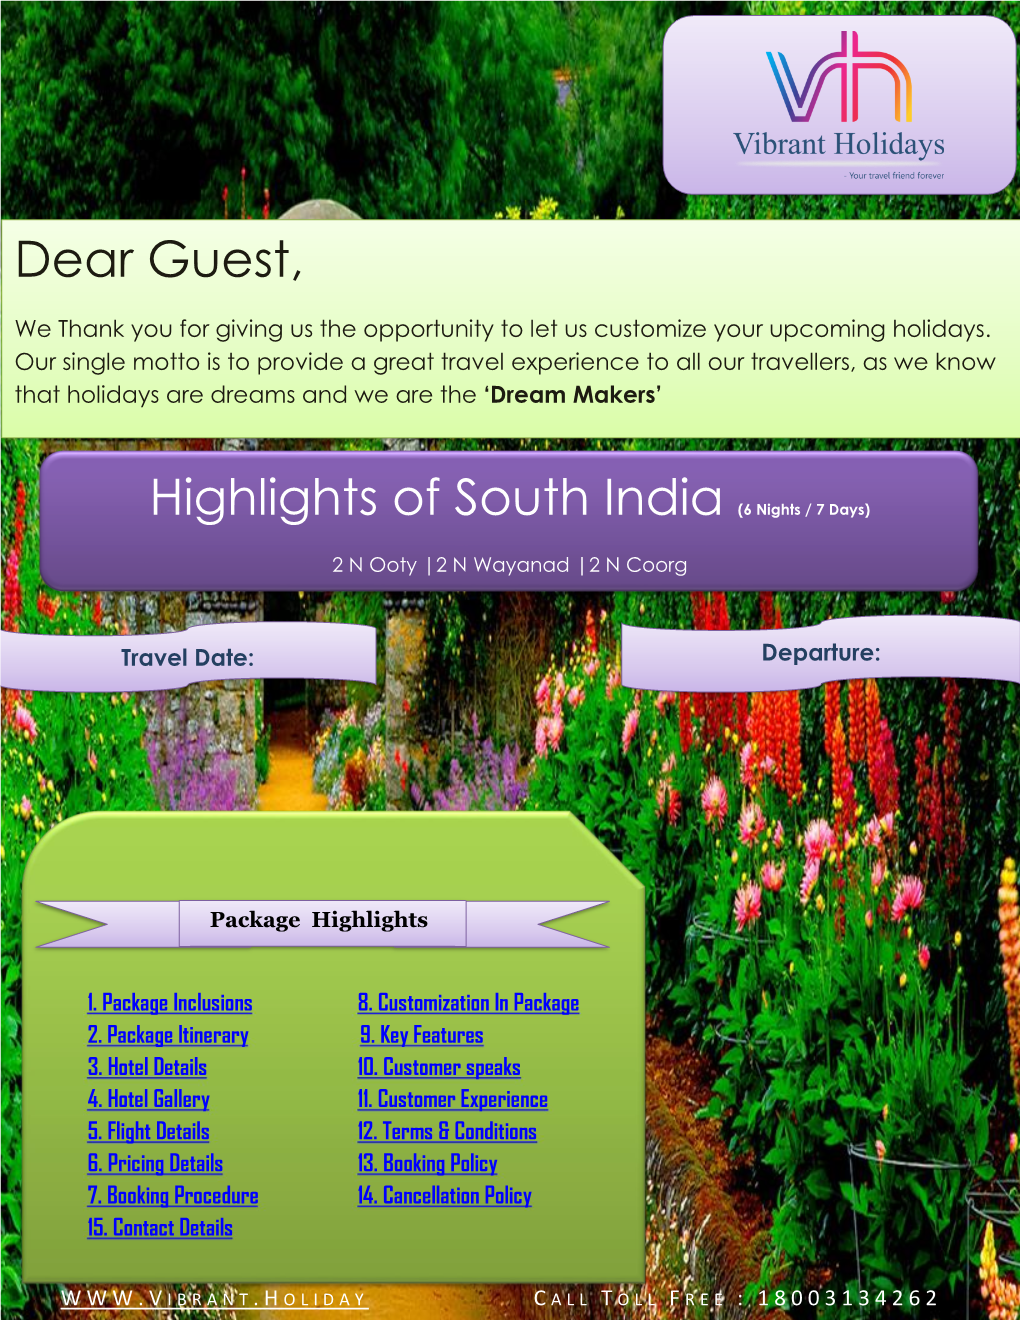 Highlights of South India (6 Nights / 7 Days) Dear Guest